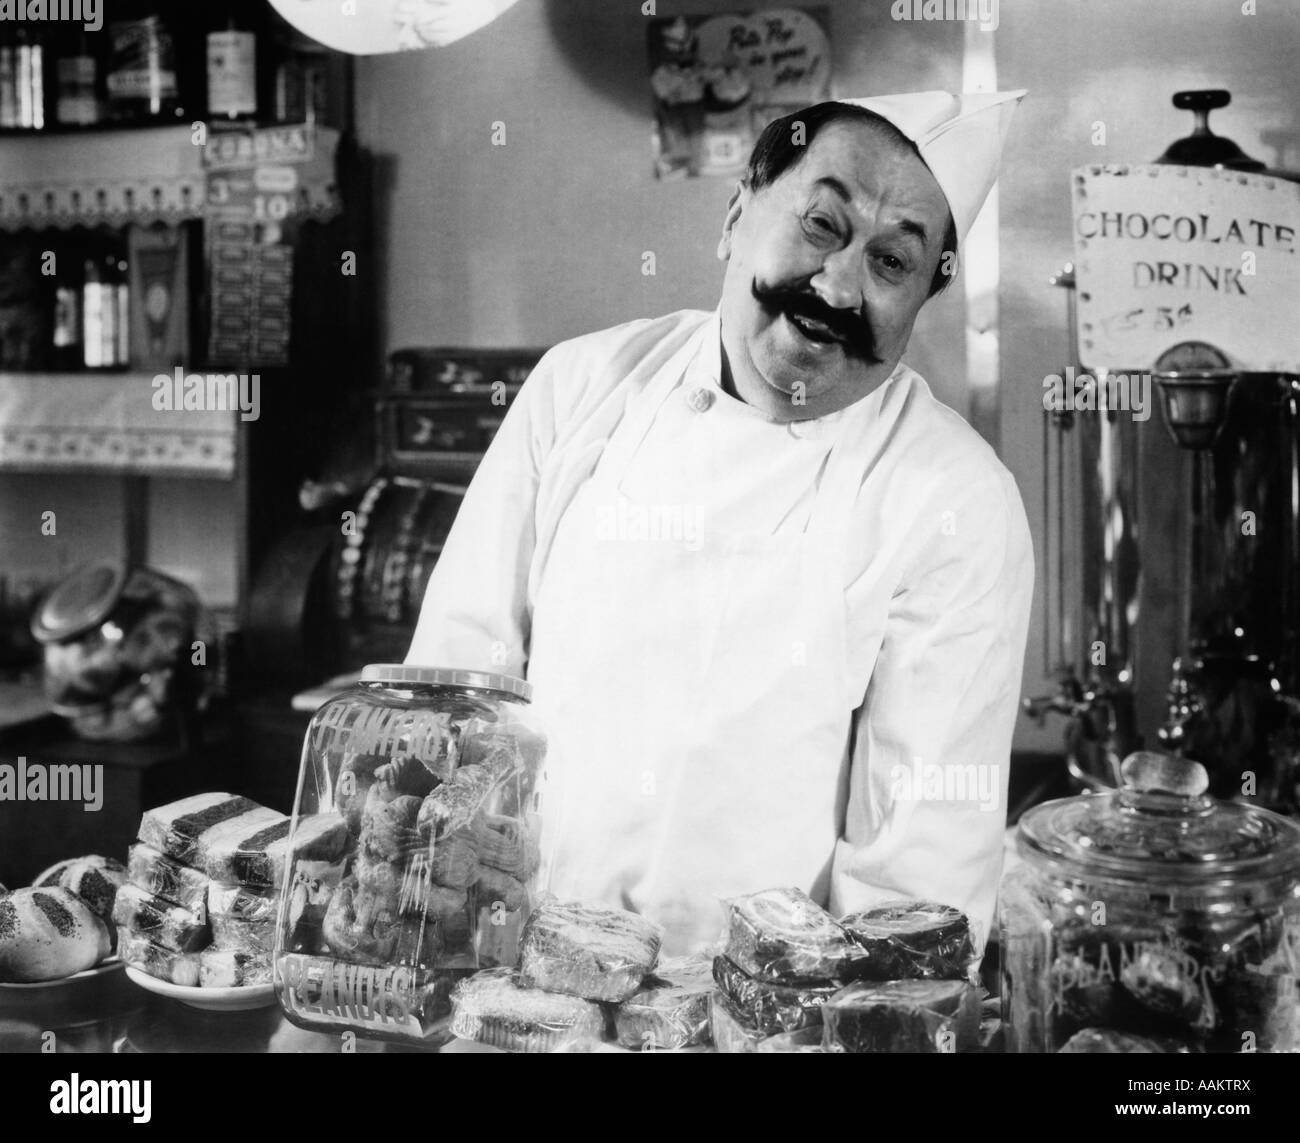 1930s VINTAGE PORTRAIT OF SMILING PROPRIETOR BEHIND COUNTER IN COFFEE AND SWEET SHOP LOOKING AT CAMERA Stock Photo